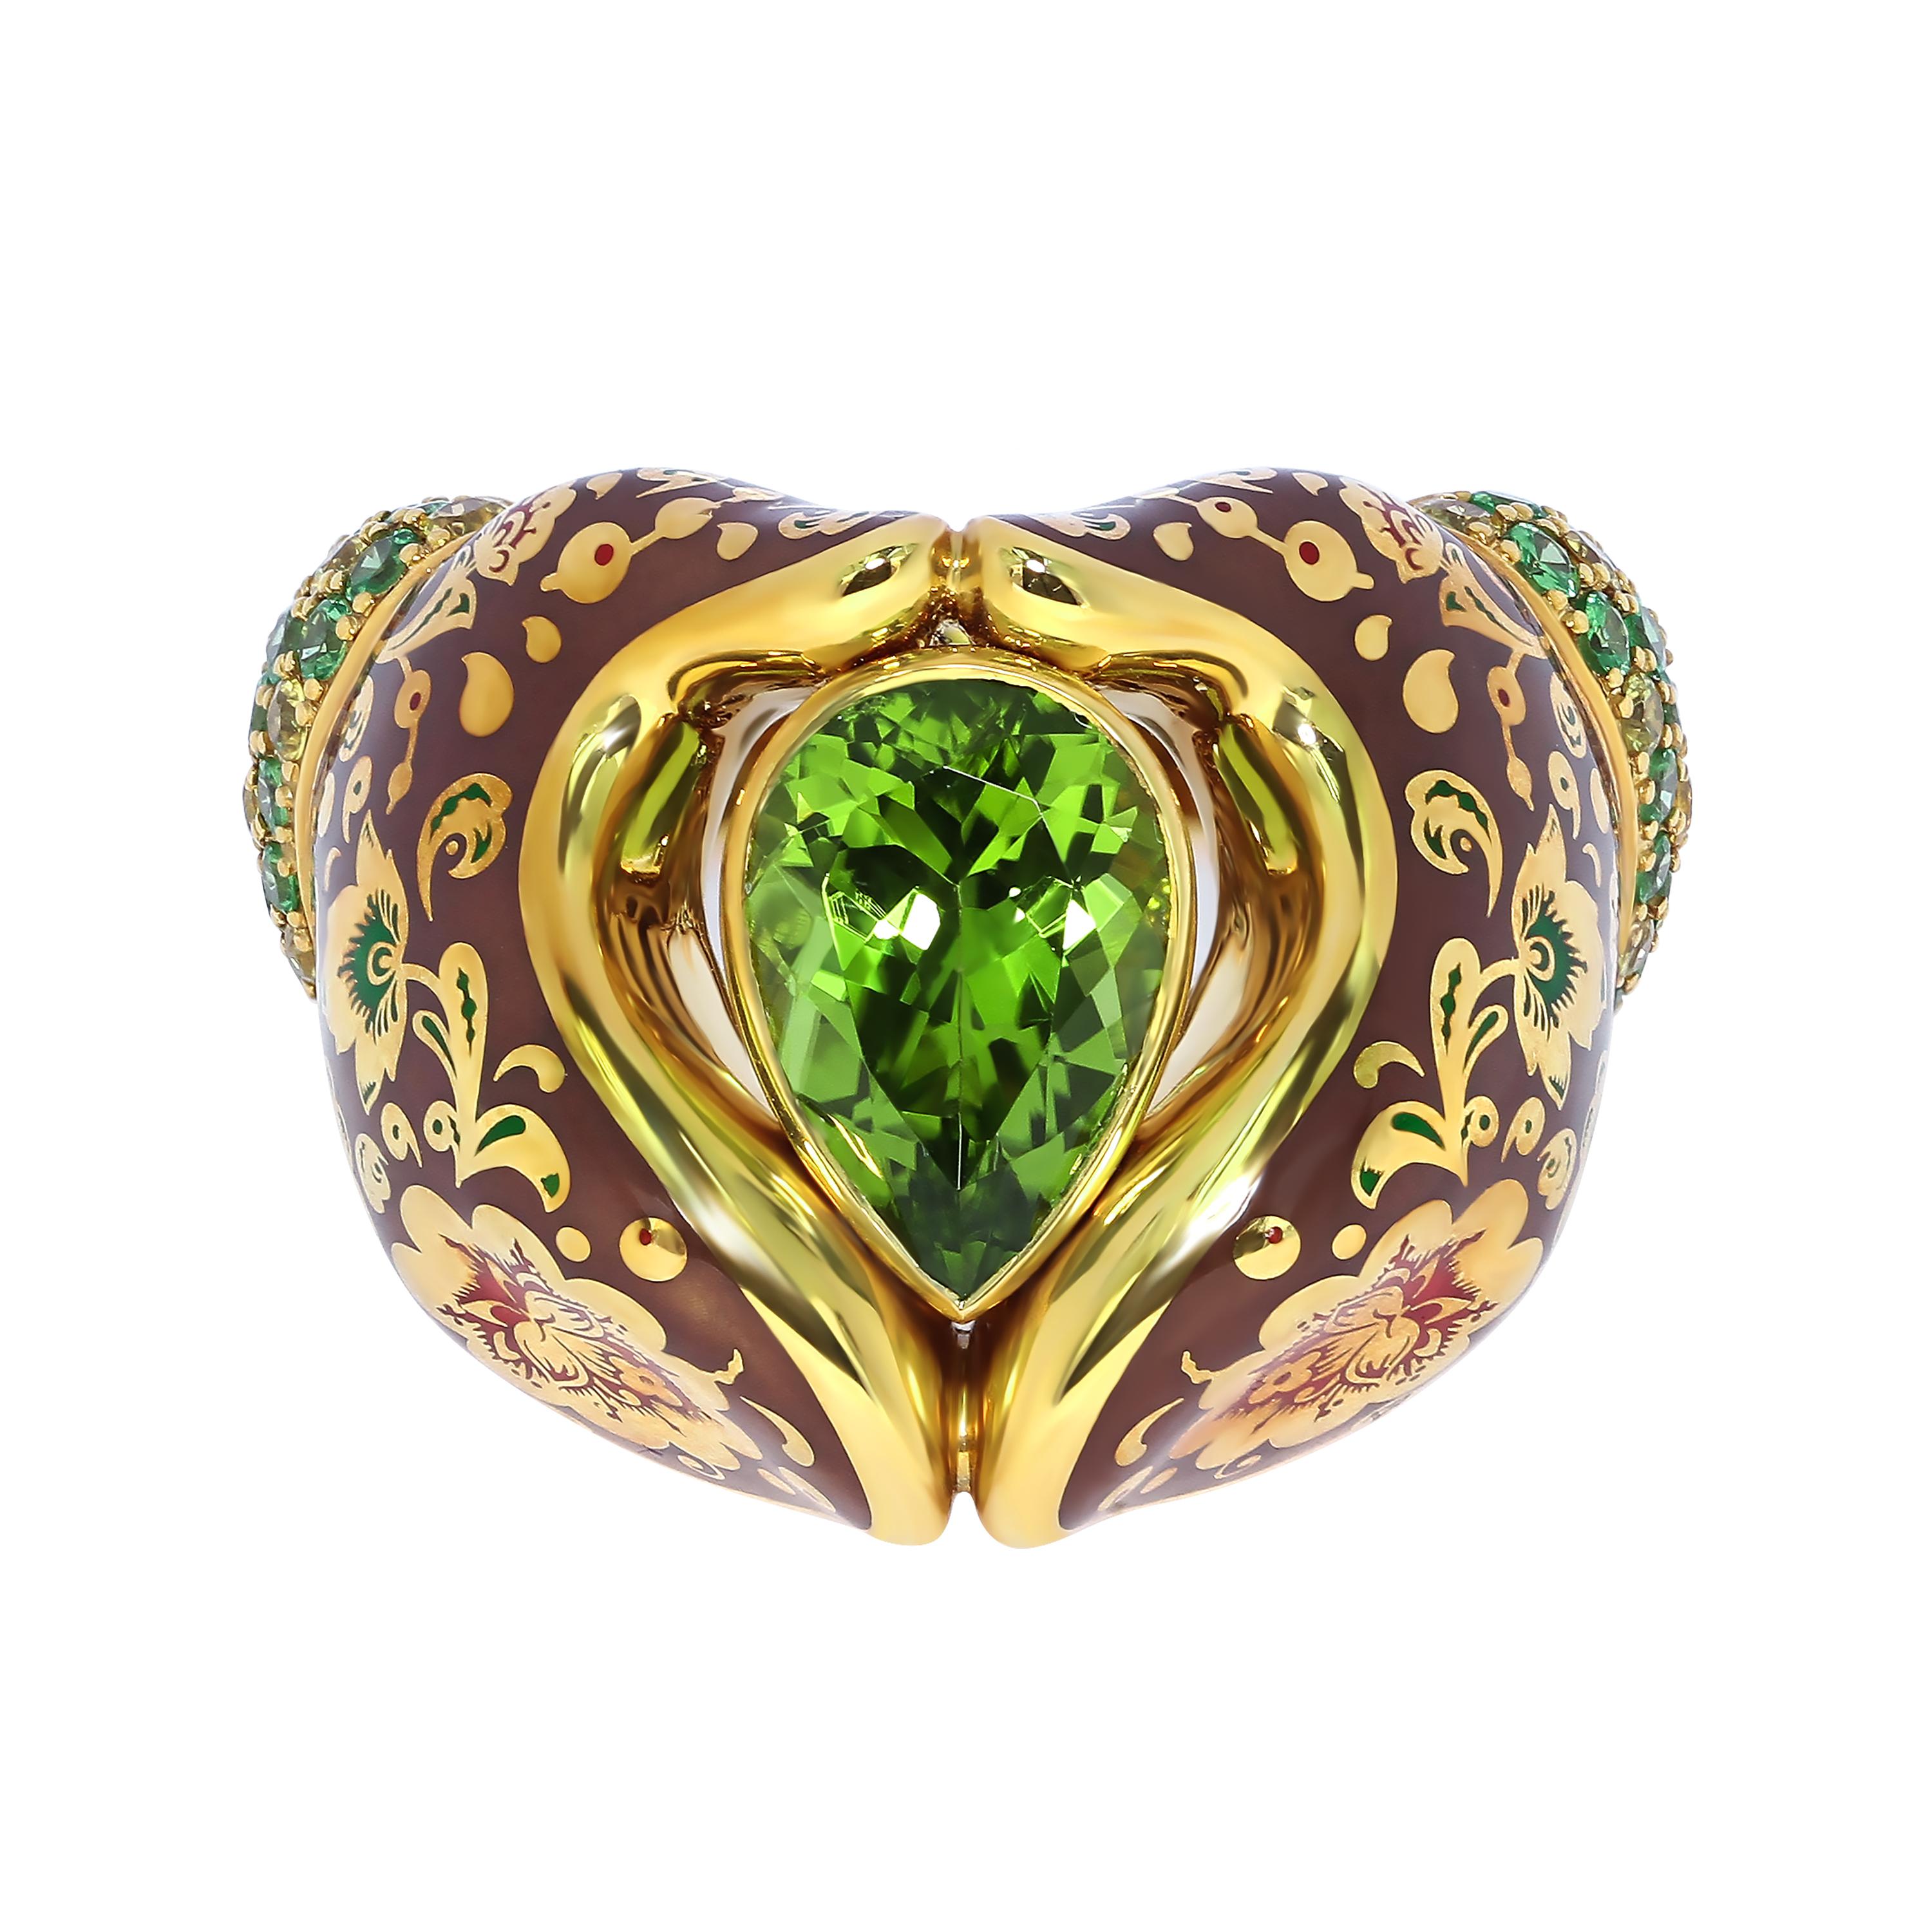 Peridot 3.27 Carat Tsavorite Sapphire 18 Karat Yellow Gold Mitten Ring
Russian winter is known to the whole world. So that hands do not freeze, long time ago people came up with wearing mittens. It was decorated with various Russian folk patterns